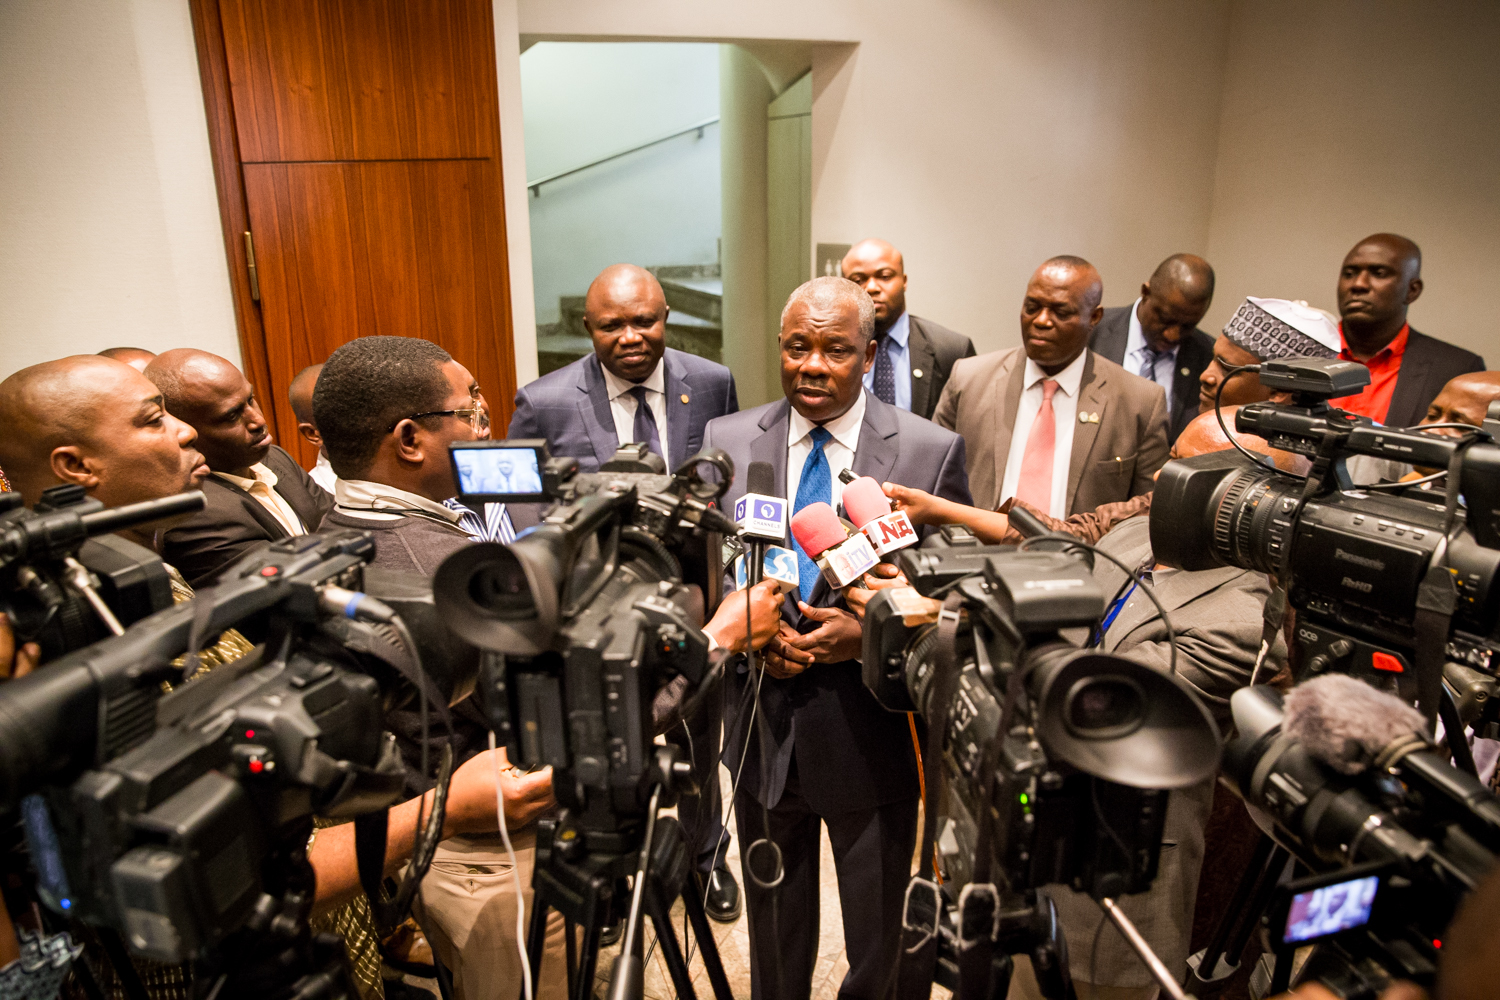 Lagos State Governor, Mr. Akinwunmi Ambode (left) watches as his Ogun State counterpart, Senator Ibikunle Amosun (middle) press the state House correspondents shortly after the courtesy visit to the President by ICAN council members at the Aso Villa, Abuja on Tuesday, September 01, 2015.